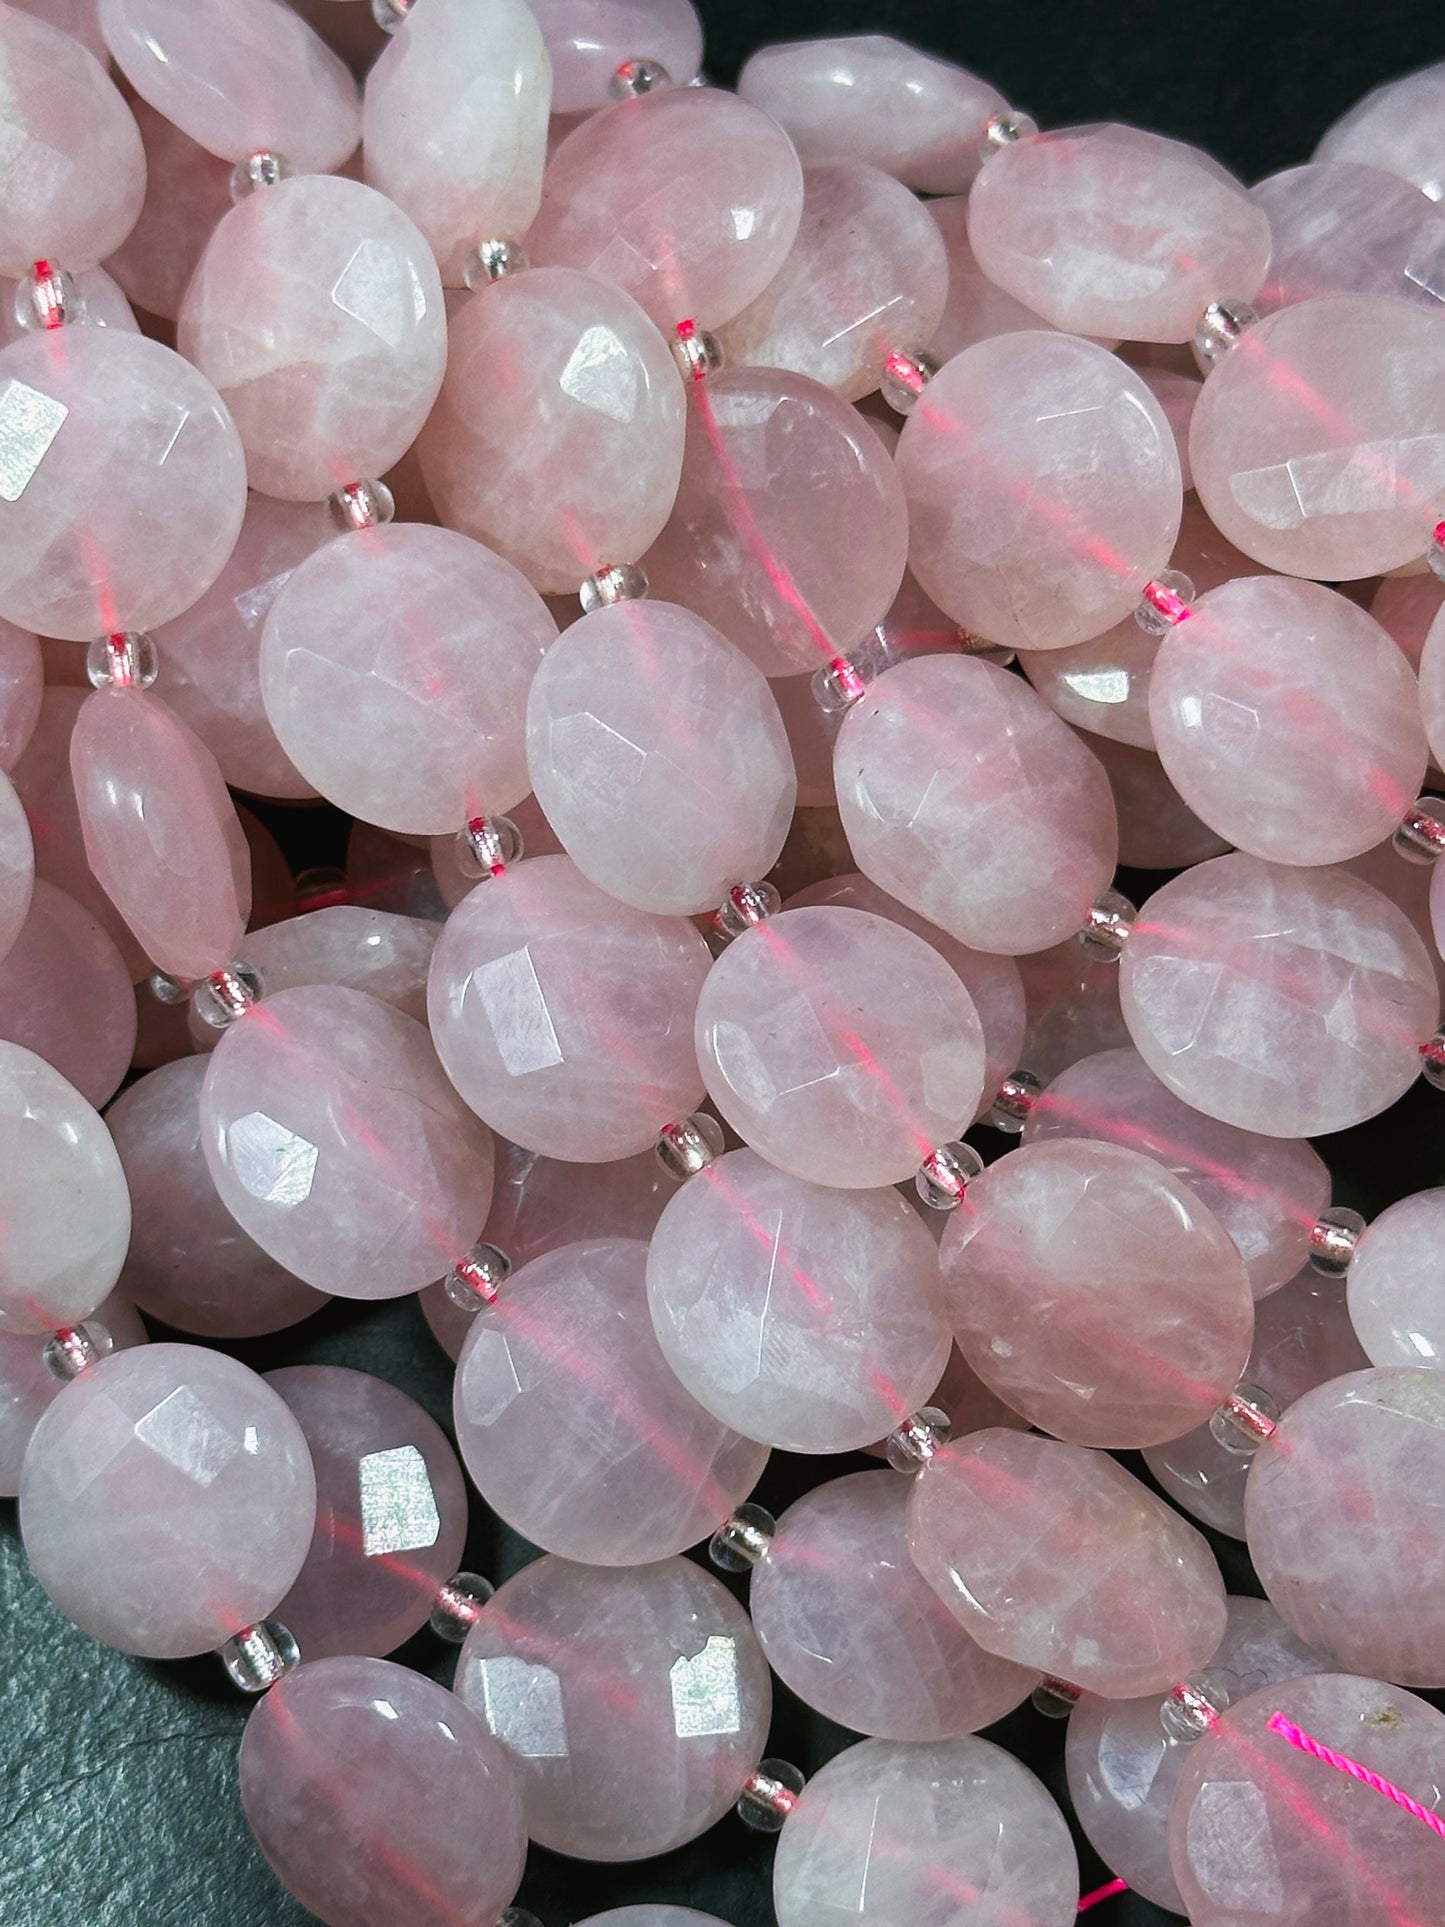 Natural Rose Quartz Gemstone Bead Faceted 18mm Coin Shape, Beautiful Natural Pink Color Rose Quartz Bead, Great Quality Full Strand 15.5"